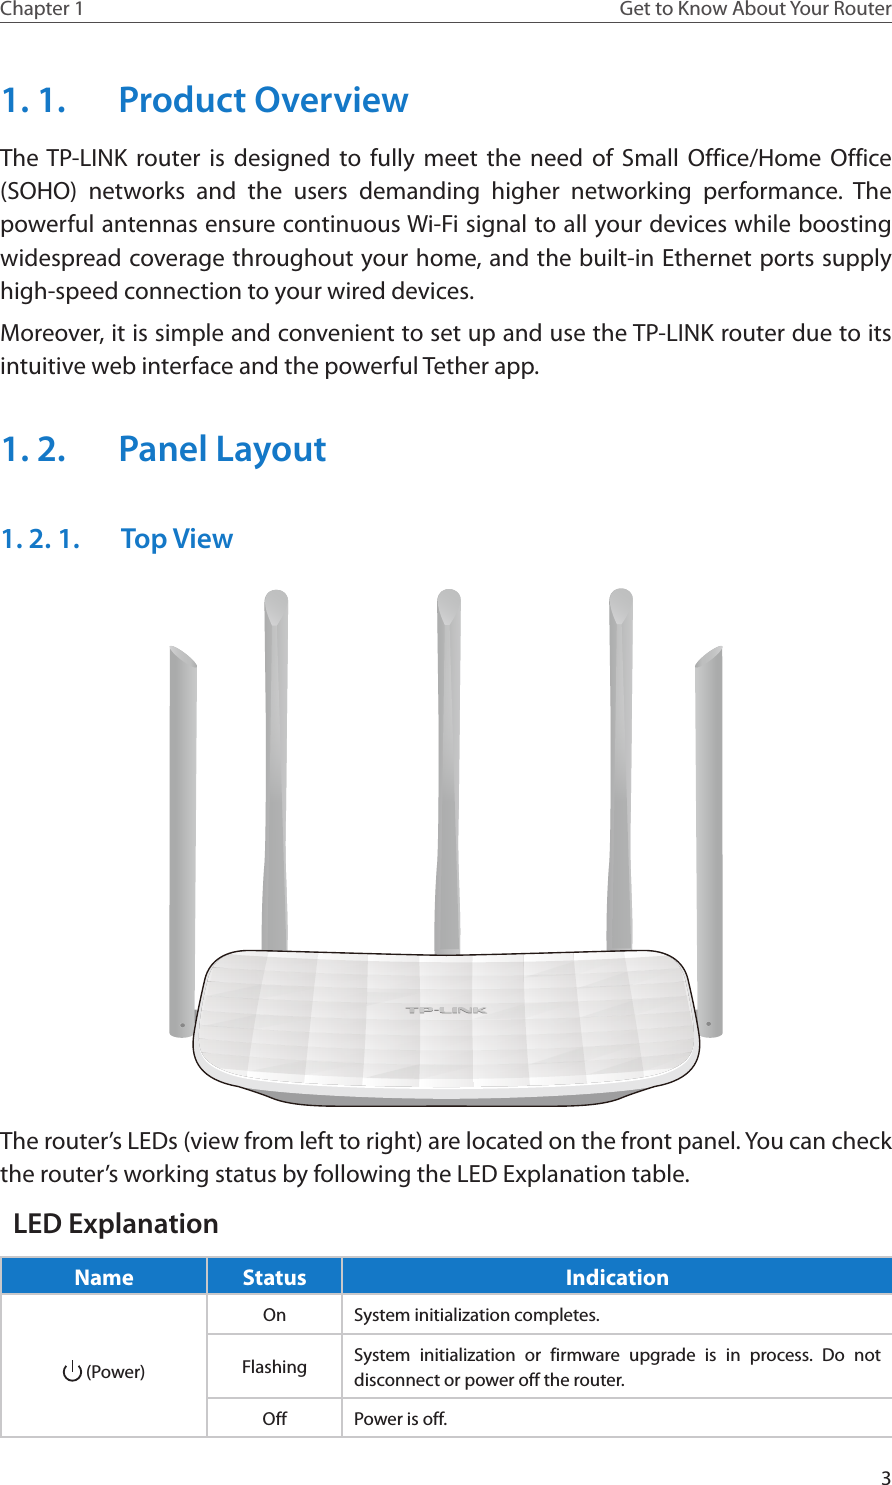 3Chapter 1 Get to Know About Your Router1. 1.  Product OverviewThe TP-LINK router is designed to fully meet the need of Small Office/Home Office (SOHO) networks and the users demanding higher networking performance. The powerful antennas ensure continuous Wi-Fi signal to all your devices while boosting widespread coverage throughout your home, and the built-in Ethernet ports supply high-speed connection to your wired devices.Moreover, it is simple and convenient to set up and use the TP-LINK router due to its intuitive web interface and the powerful Tether app.1. 2.  Panel Layout1. 2. 1.  Top ViewThe router’s LEDs (view from left to right) are located on the front panel. You can check the router’s working status by following the LED Explanation table.LED ExplanationName Status Indication (Power)On System initialization completes.Flashing System initialization or firmware upgrade is in process. Do not disconnect or power off the router.Off Power is off.